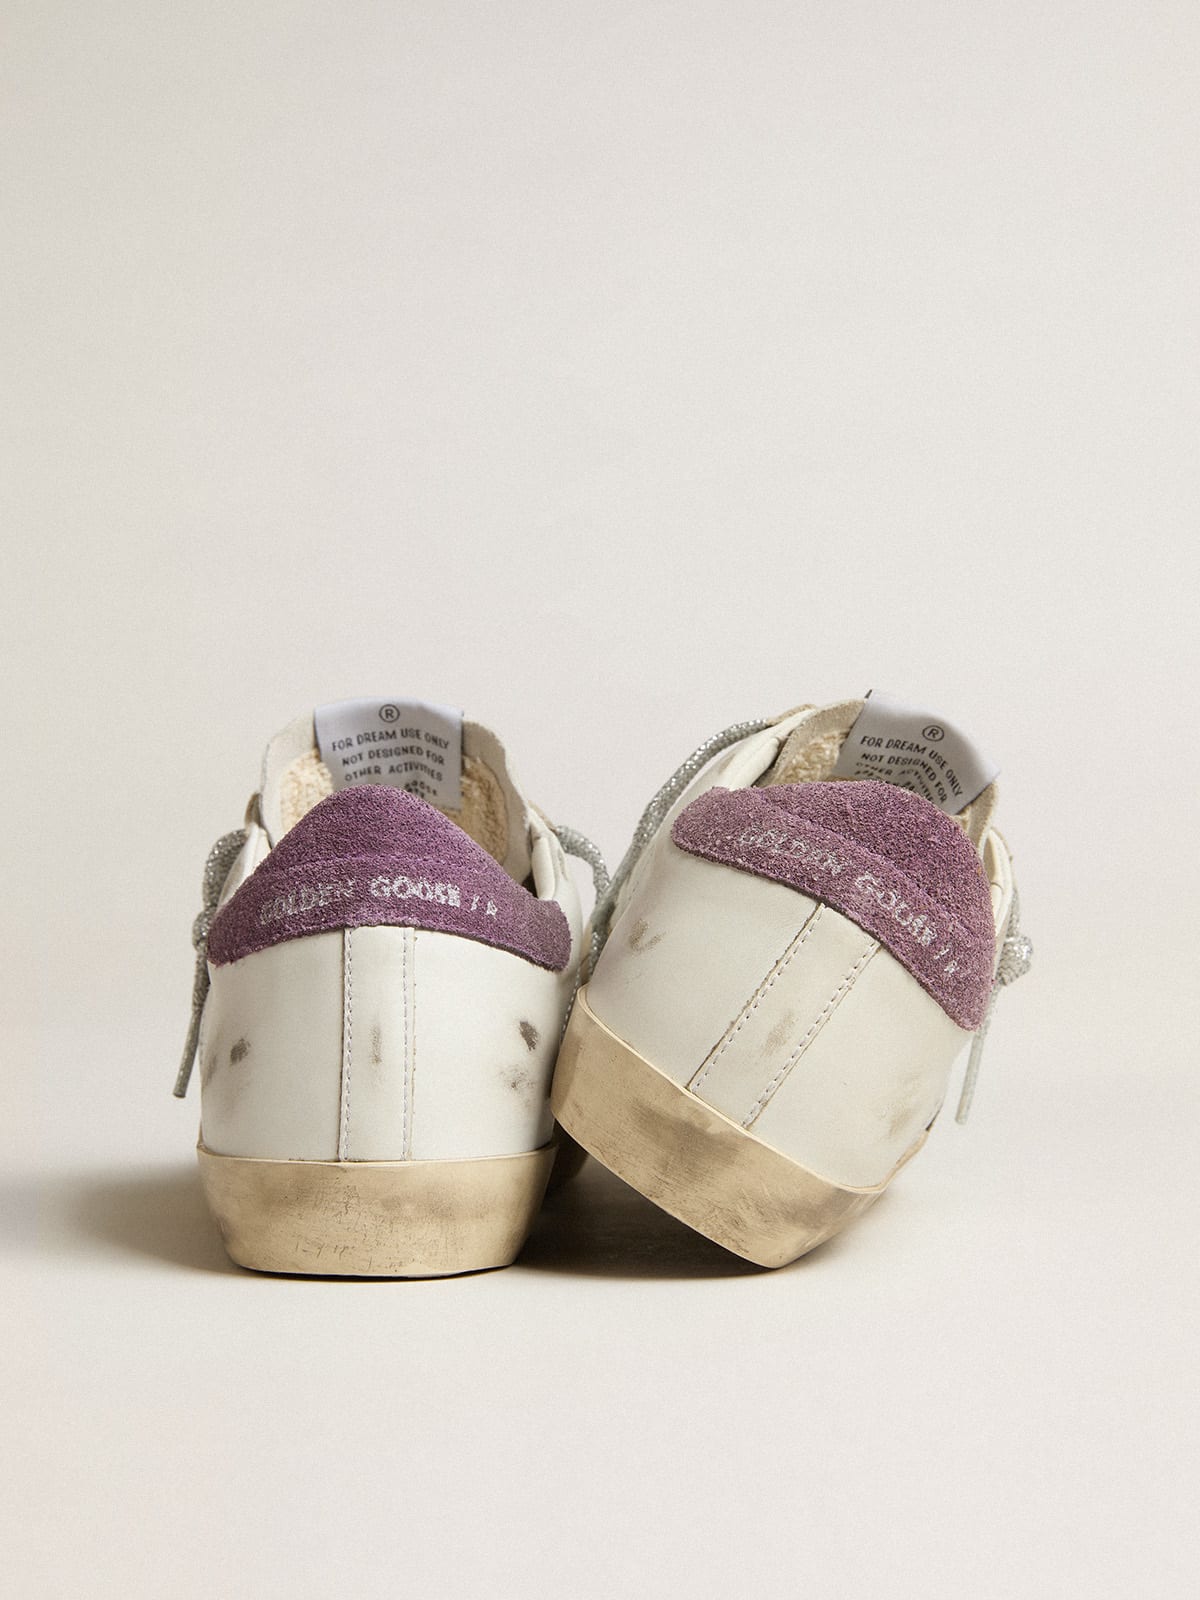 Super-Star with green snake-print suede star and purple heel tab | Golden  Goose